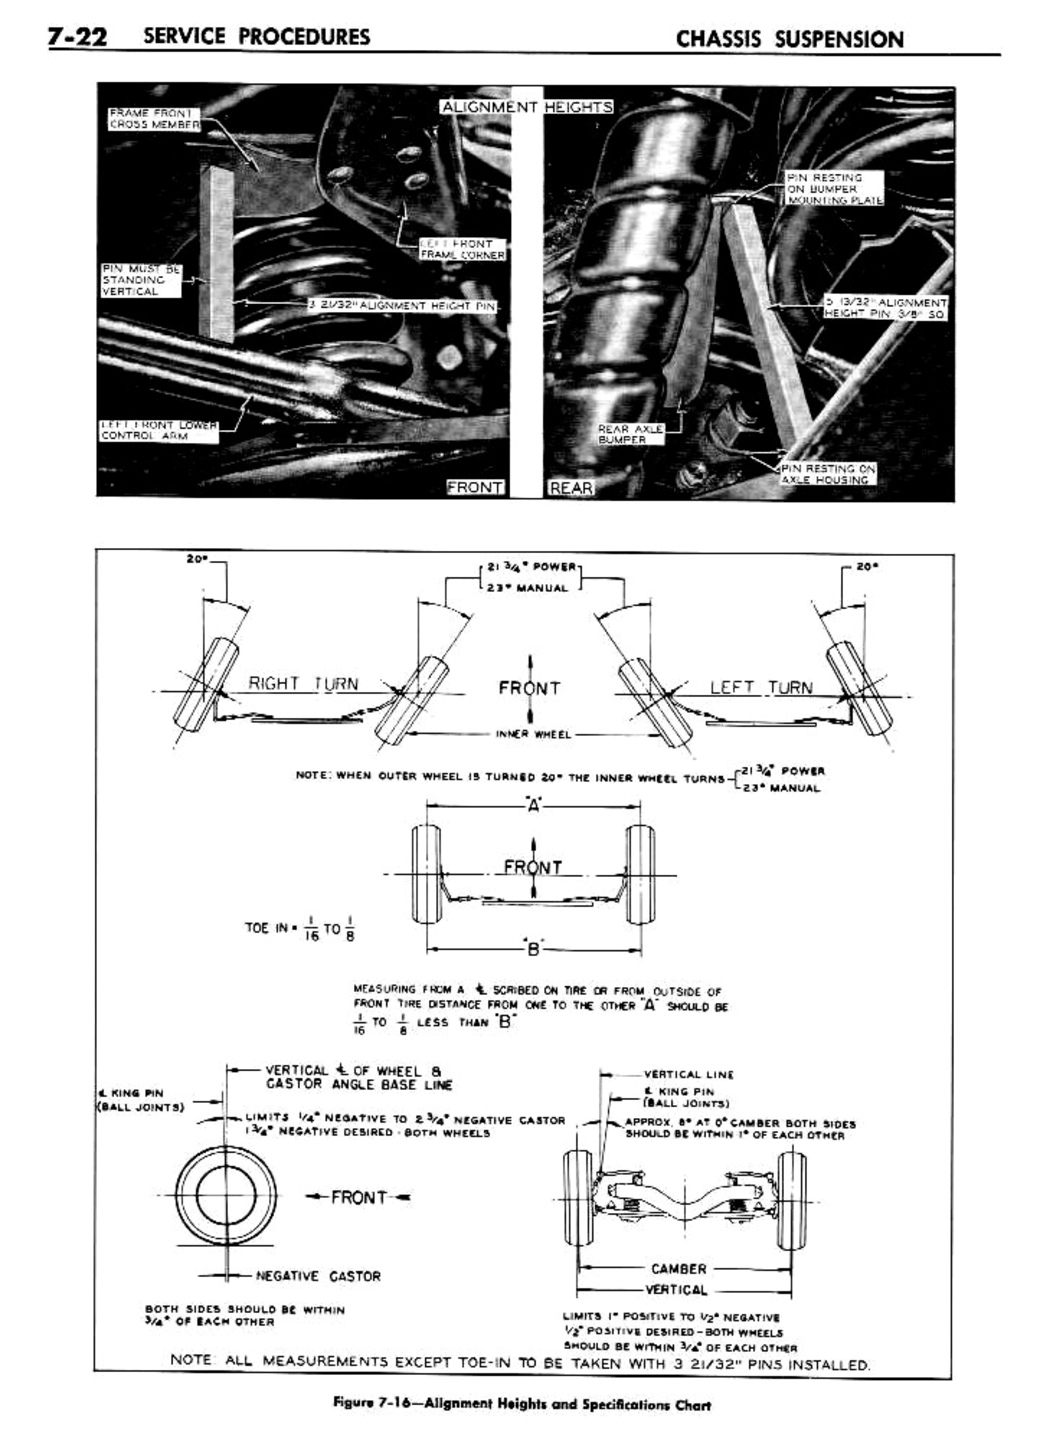 n_08 1957 Buick Shop Manual - Chassis Suspension-022-022.jpg